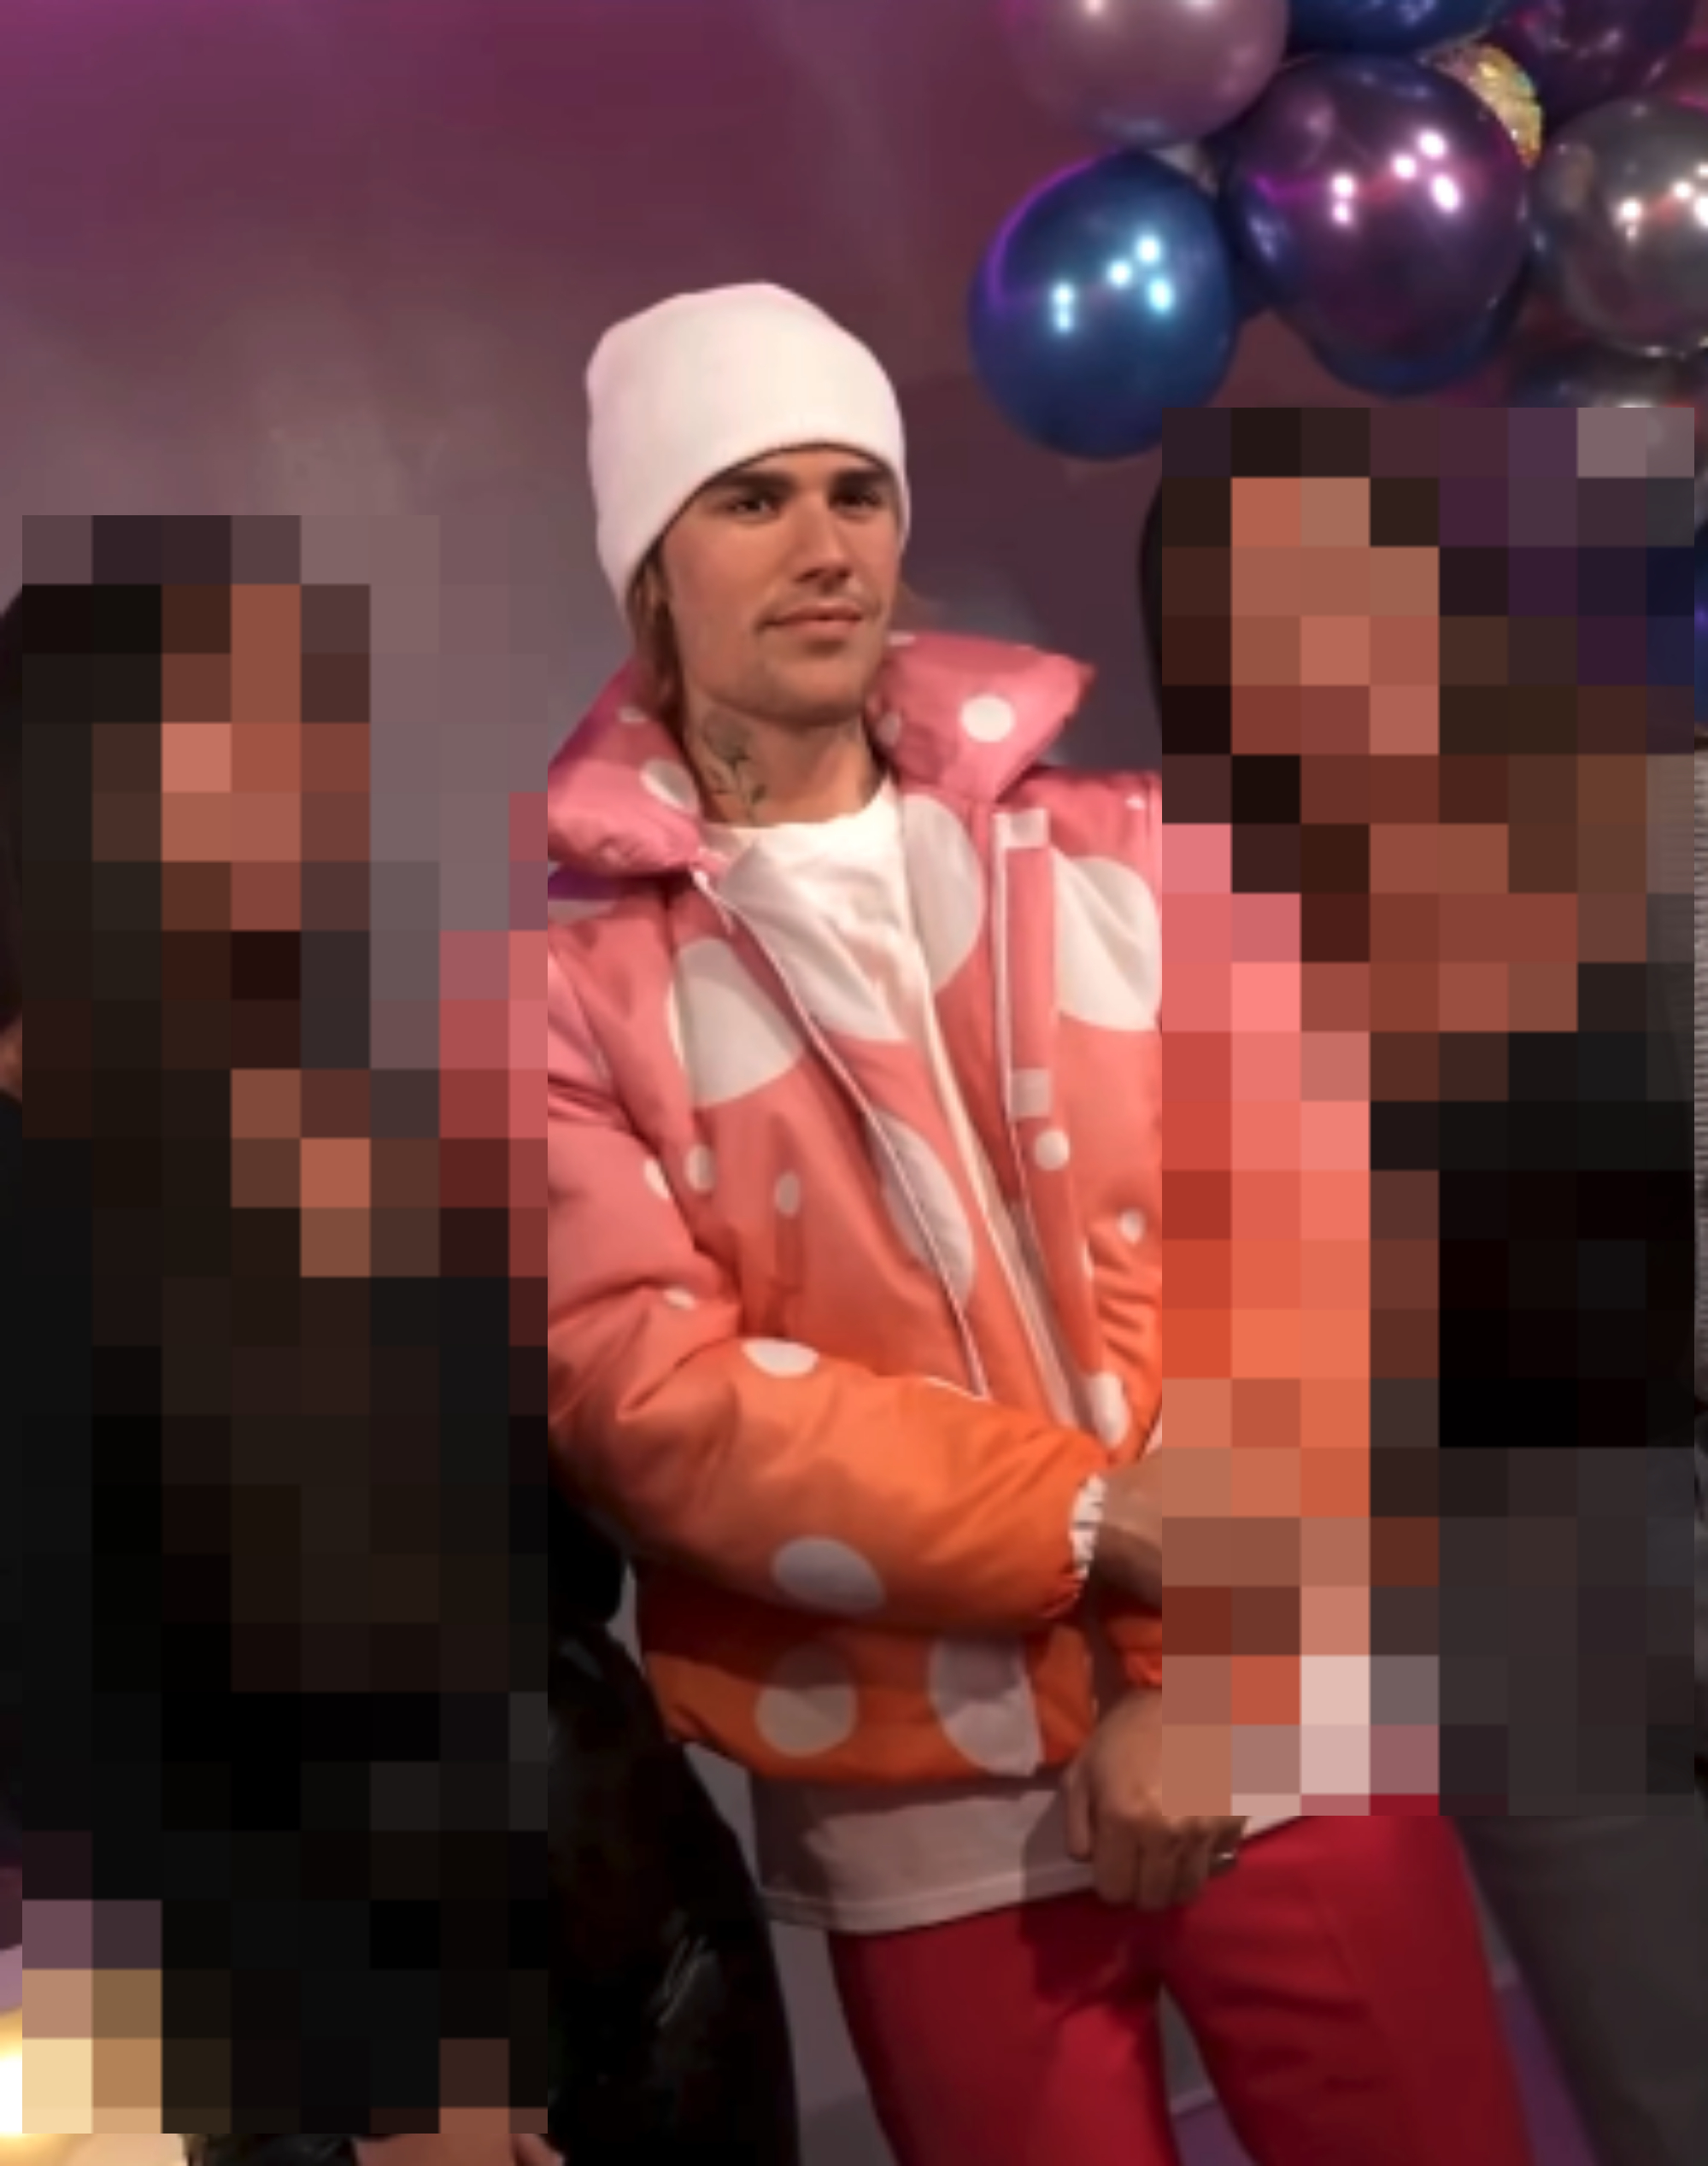 Justin Bieber with two fans, wearing a polka dot jacket and beanie